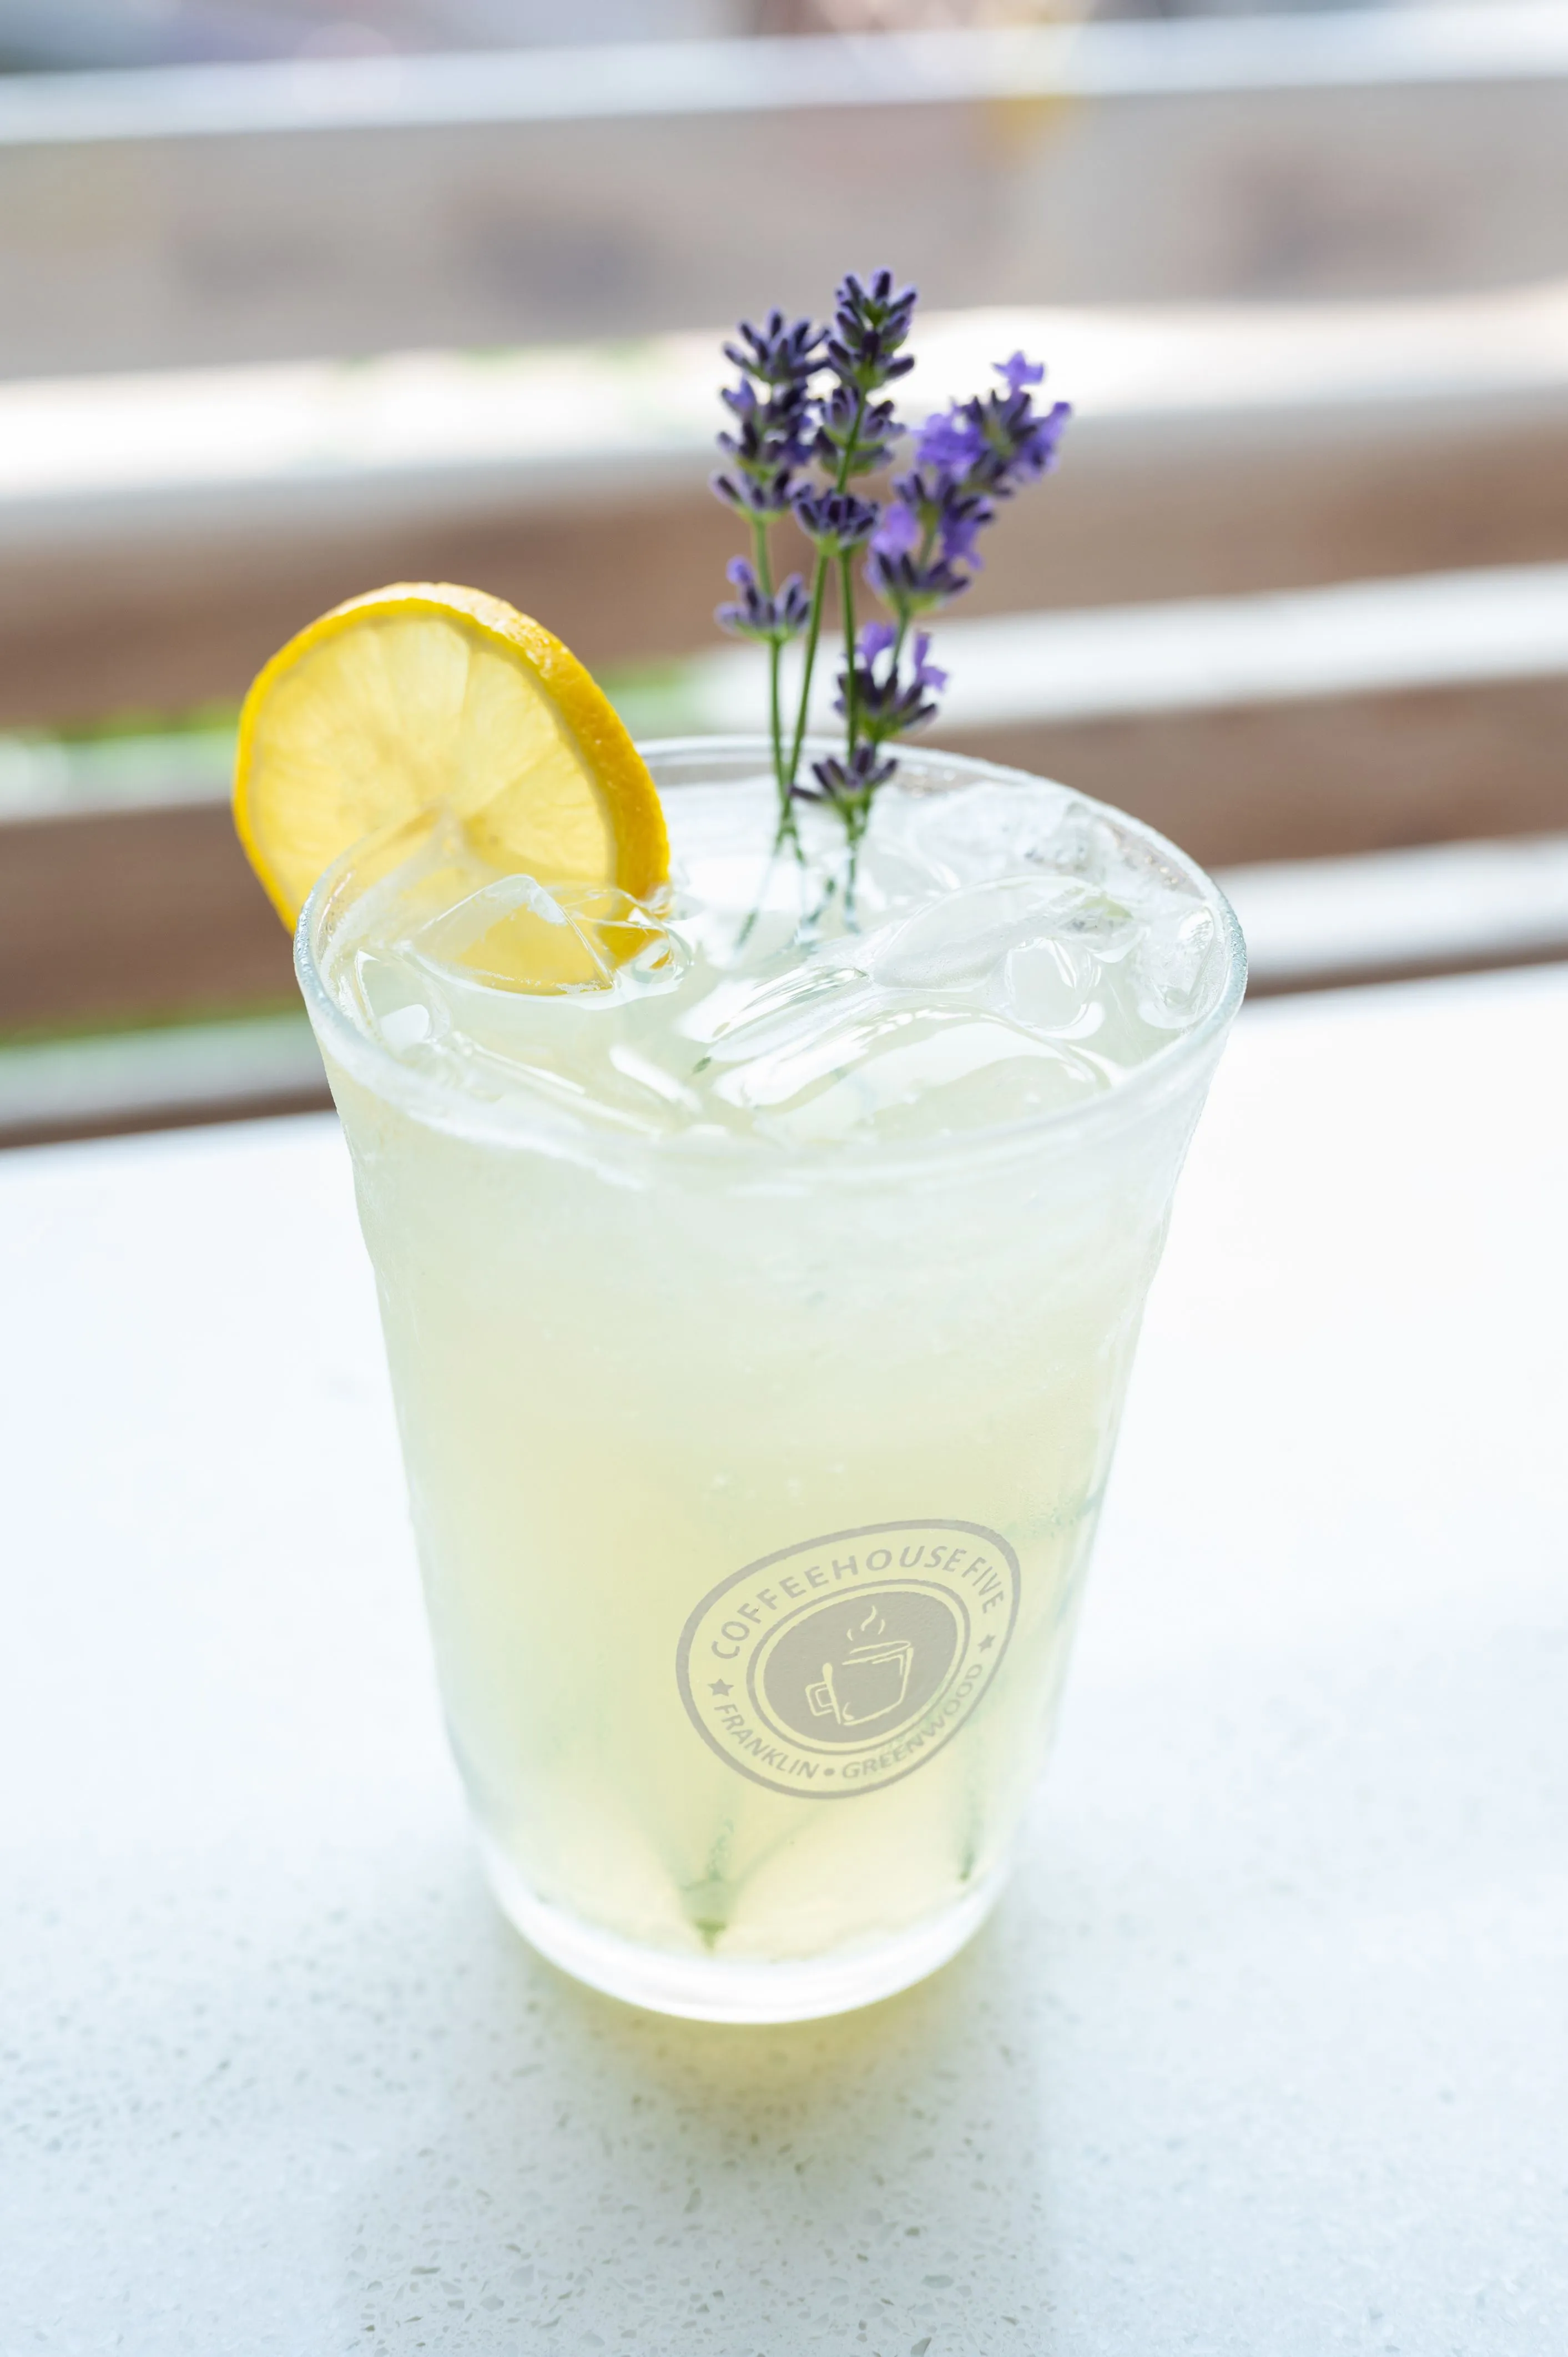 Iced lemonade garnished with a lemon slice and fresh lavender sprig in a glass imprinted with a coffeehouse logo.